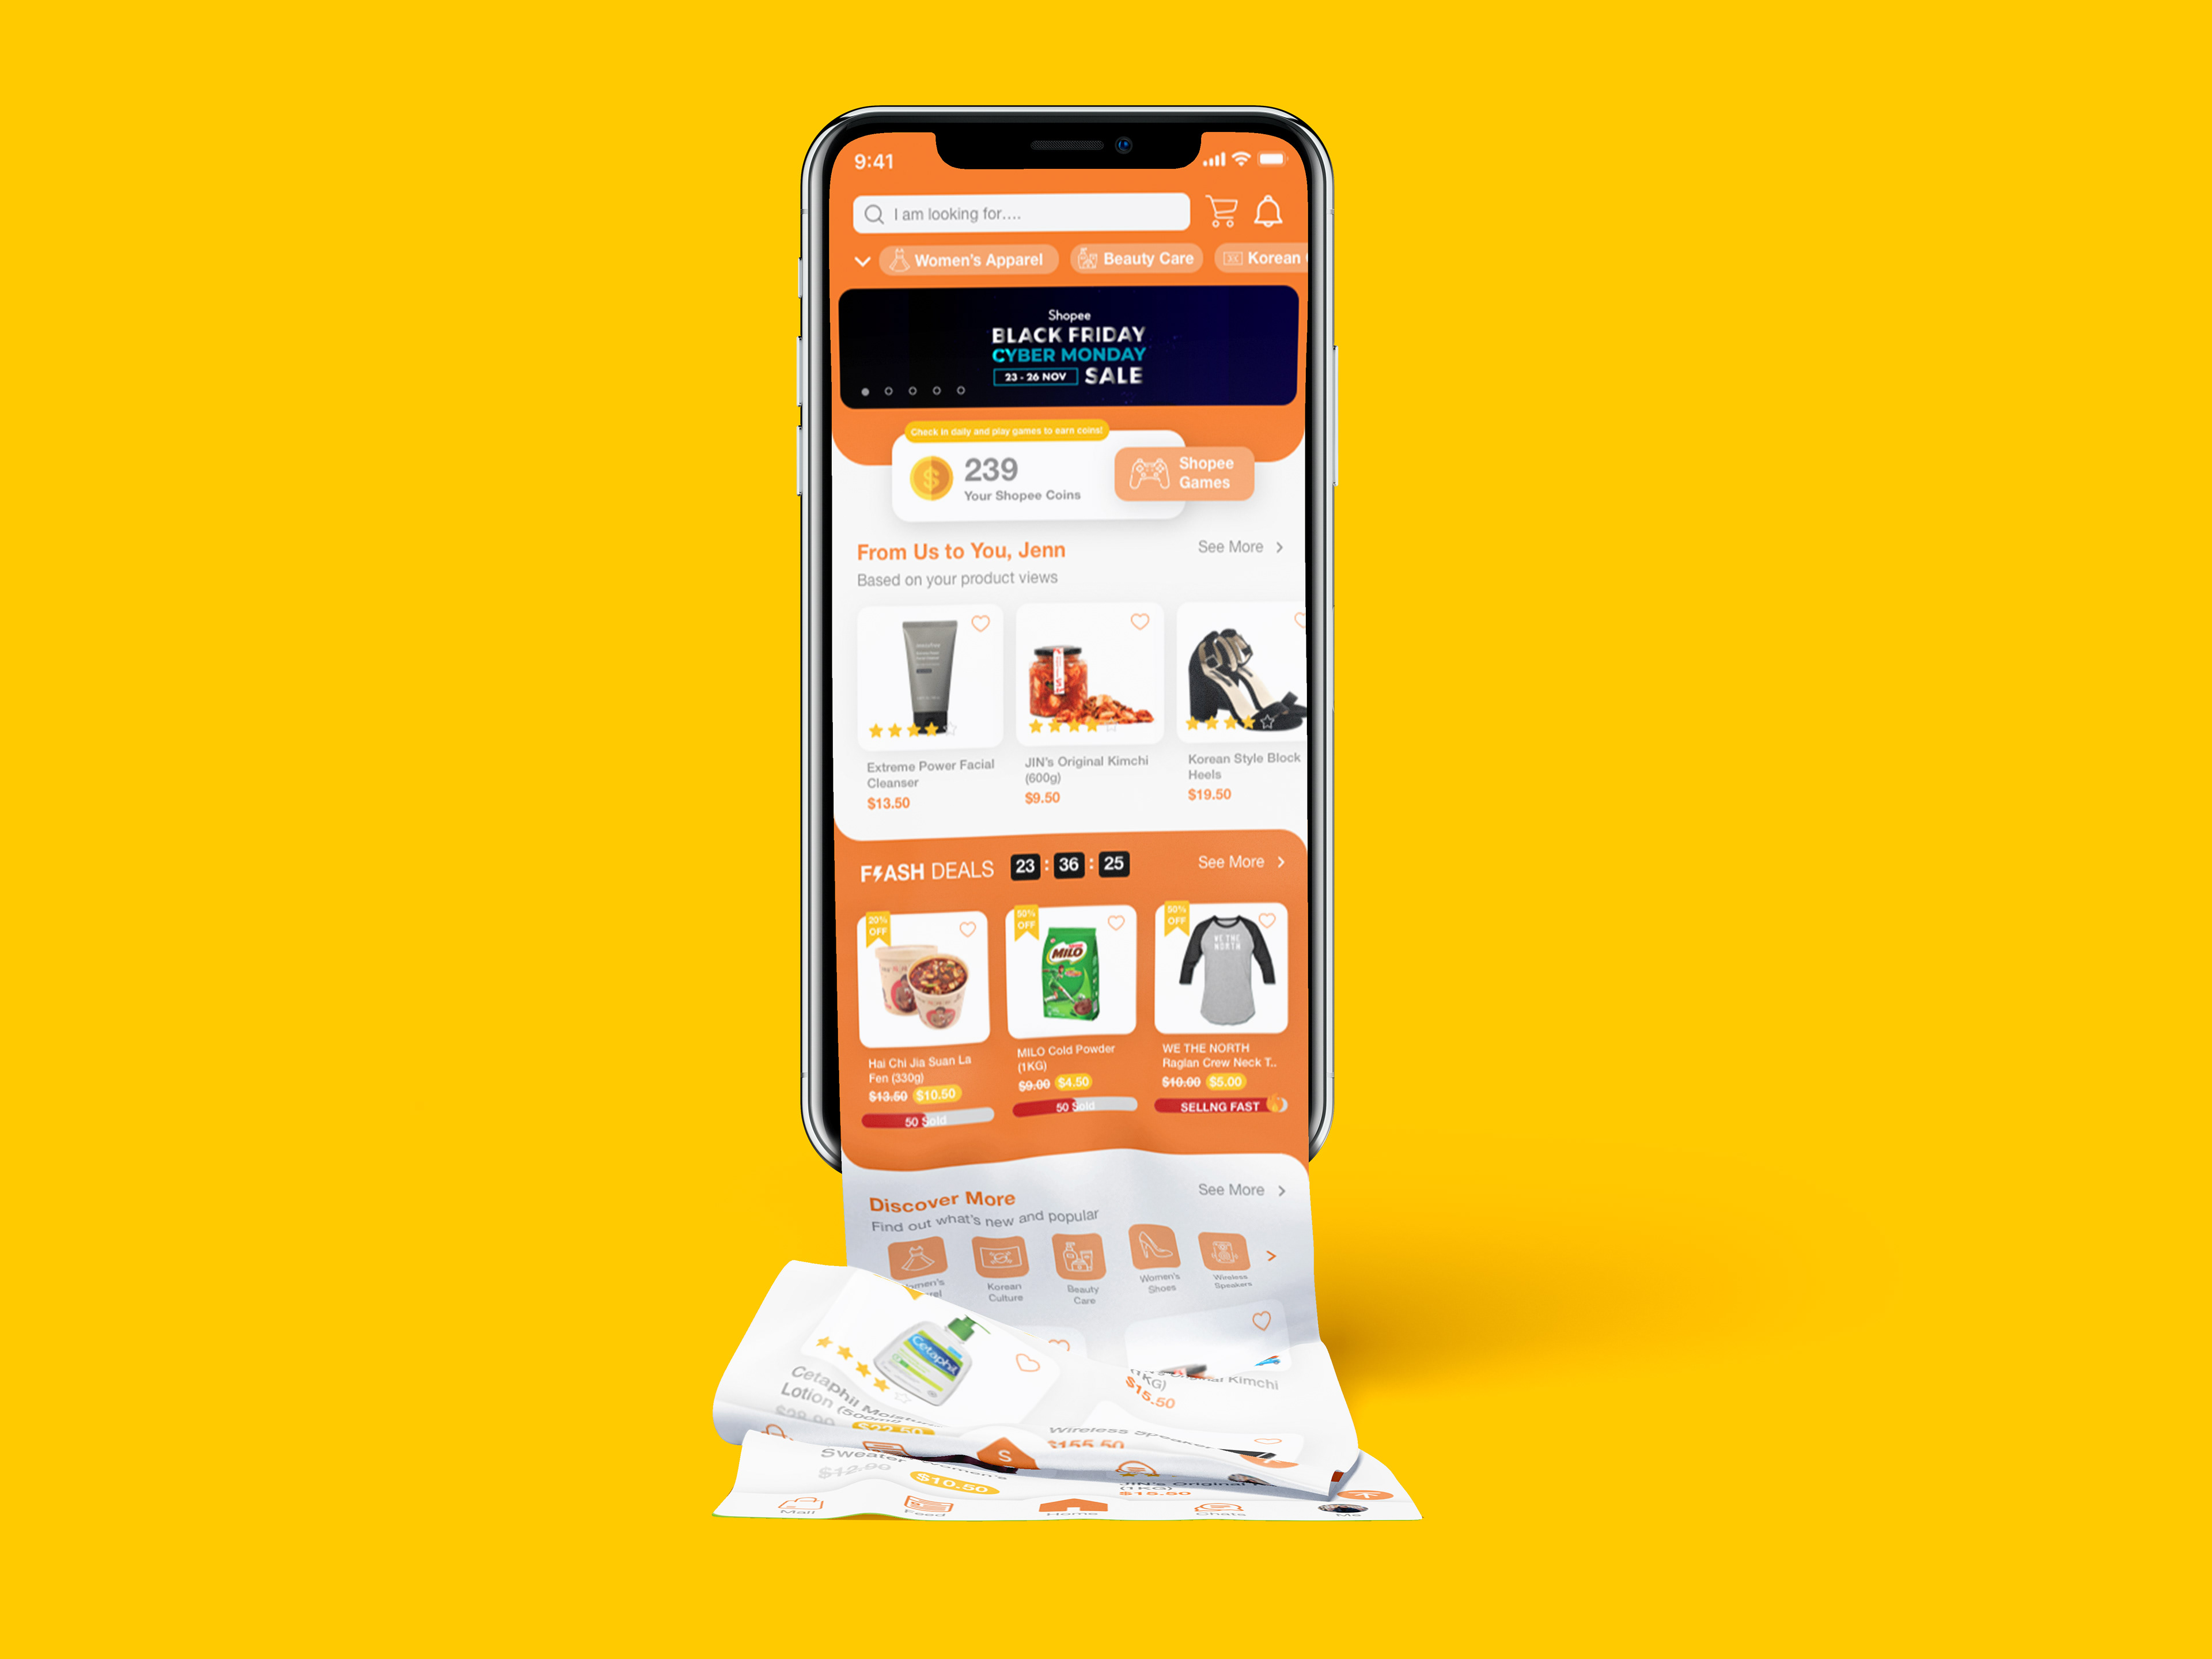 A UX case study on Shopee (and my redesign of it)